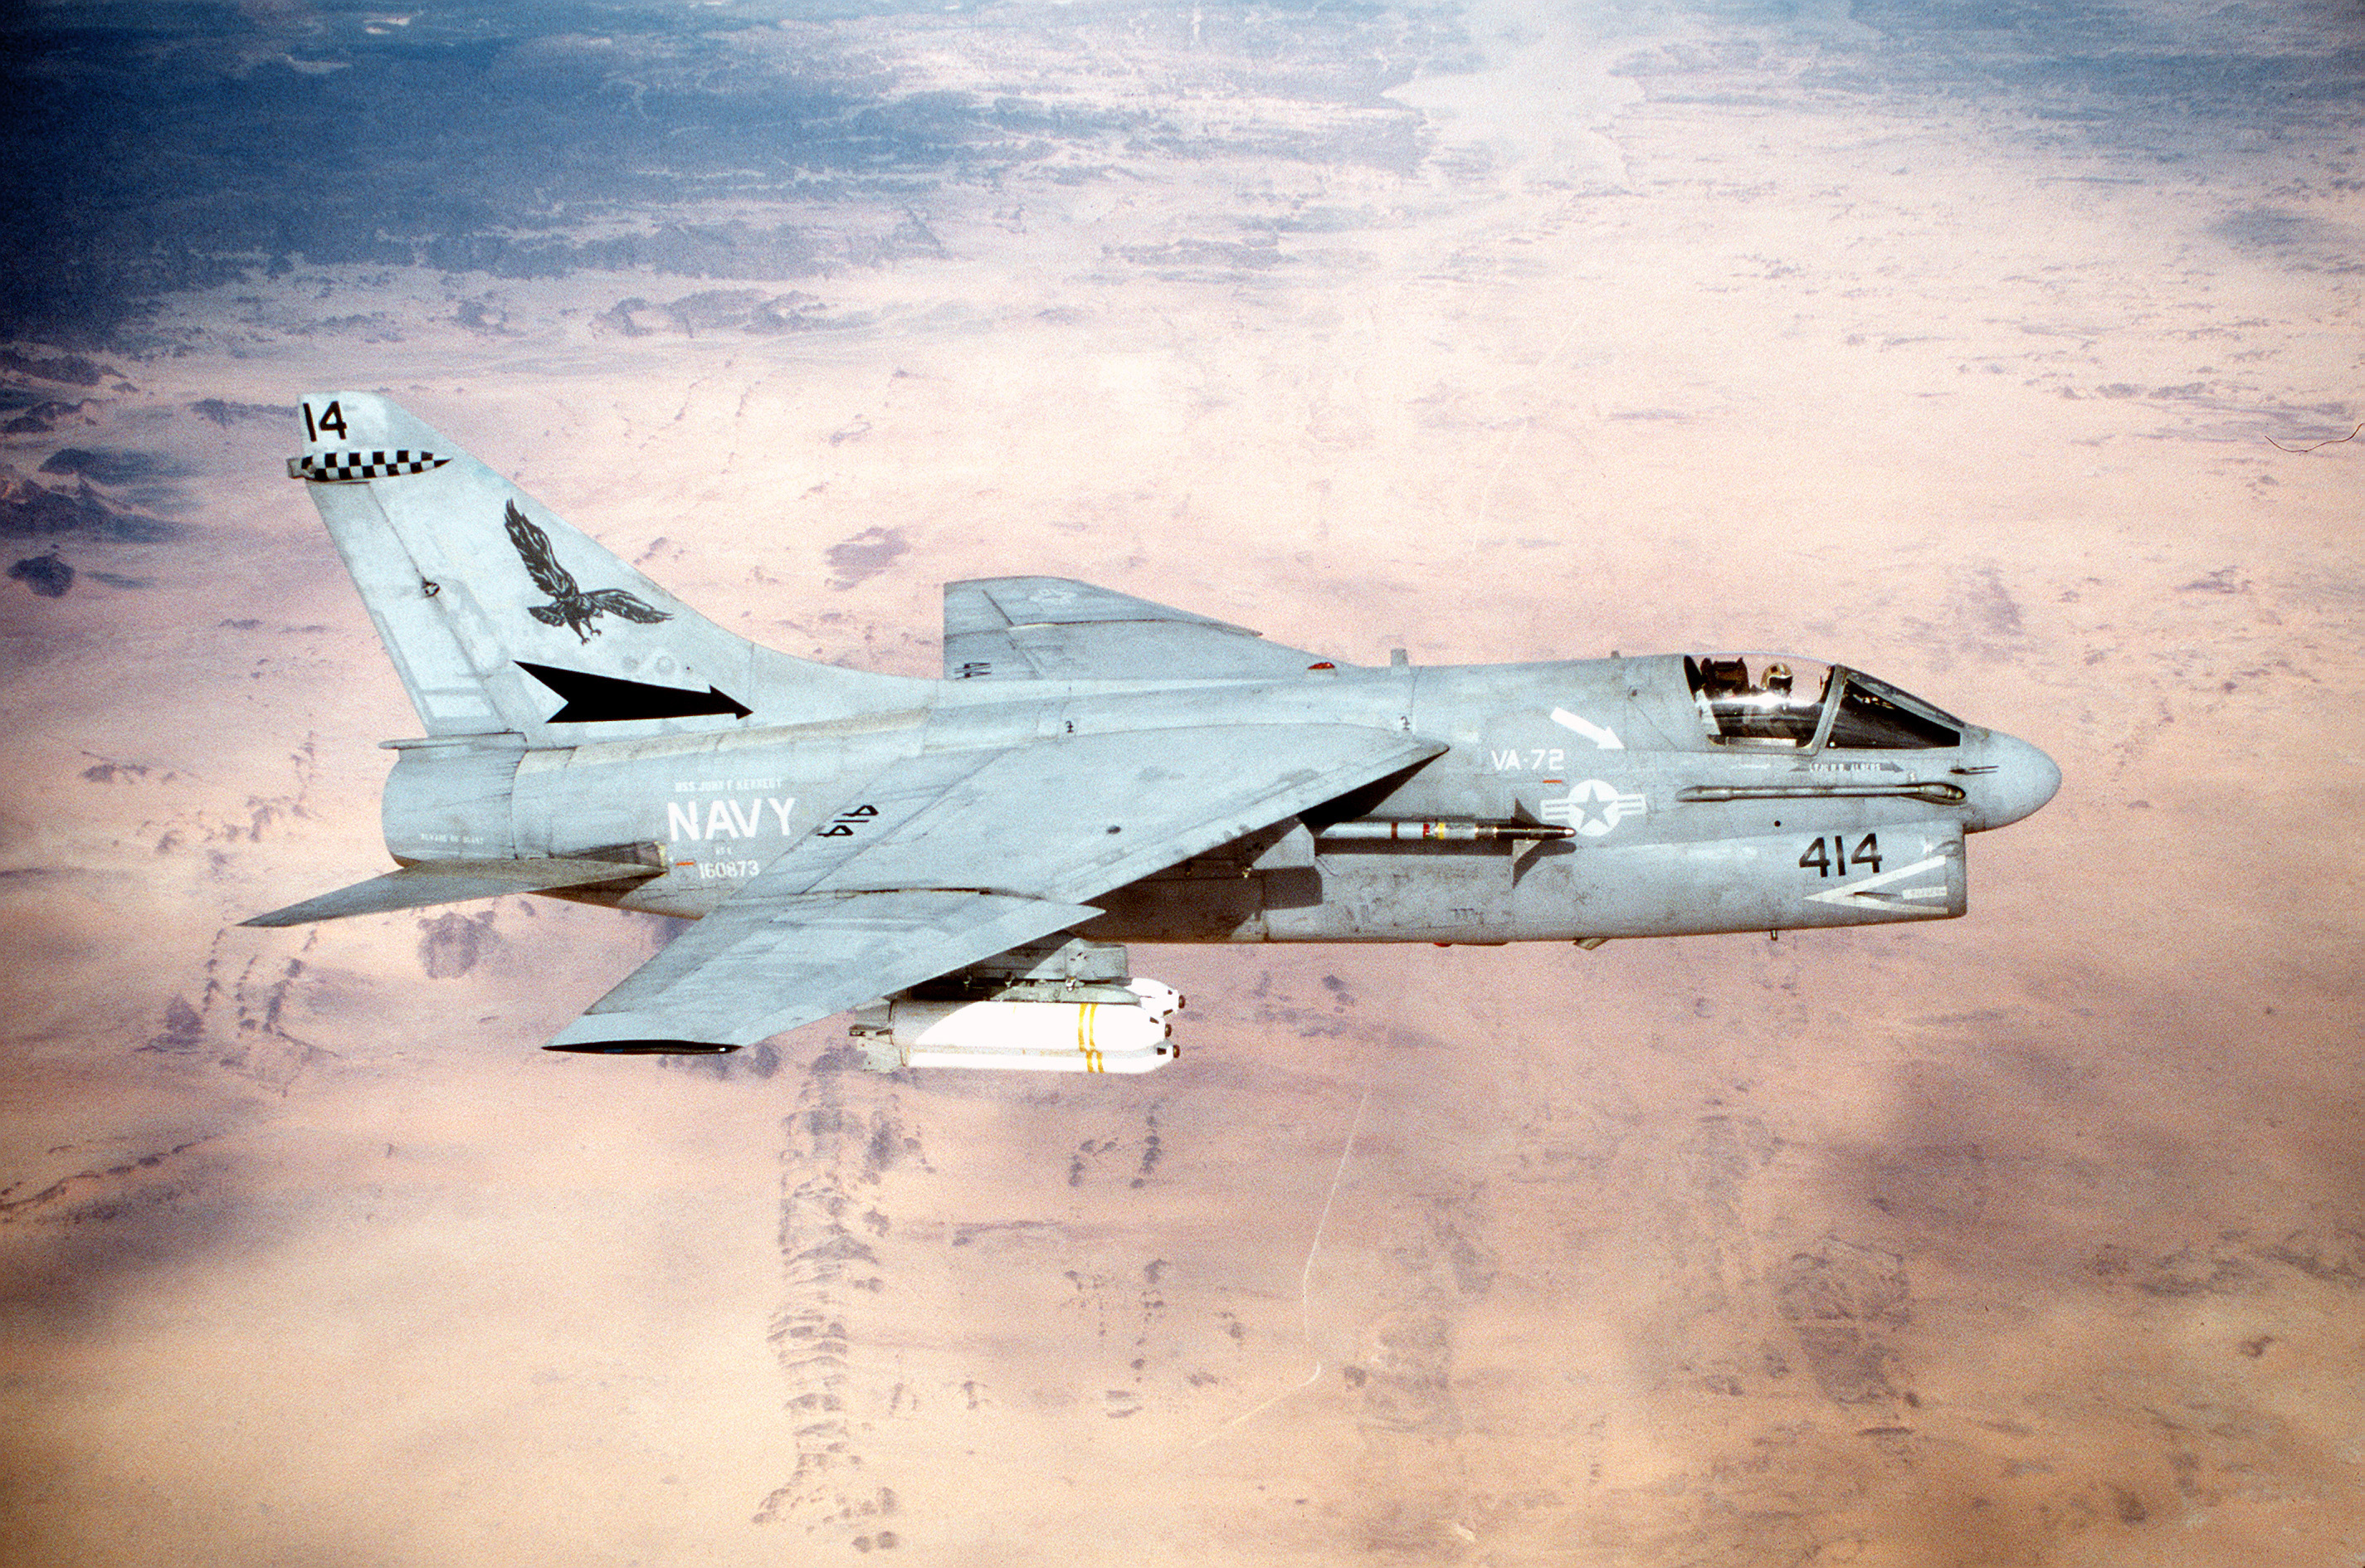 File:A-7E Corsair II of VA-72 en route to target in 1991.JPEG - Wikimedia  Commons